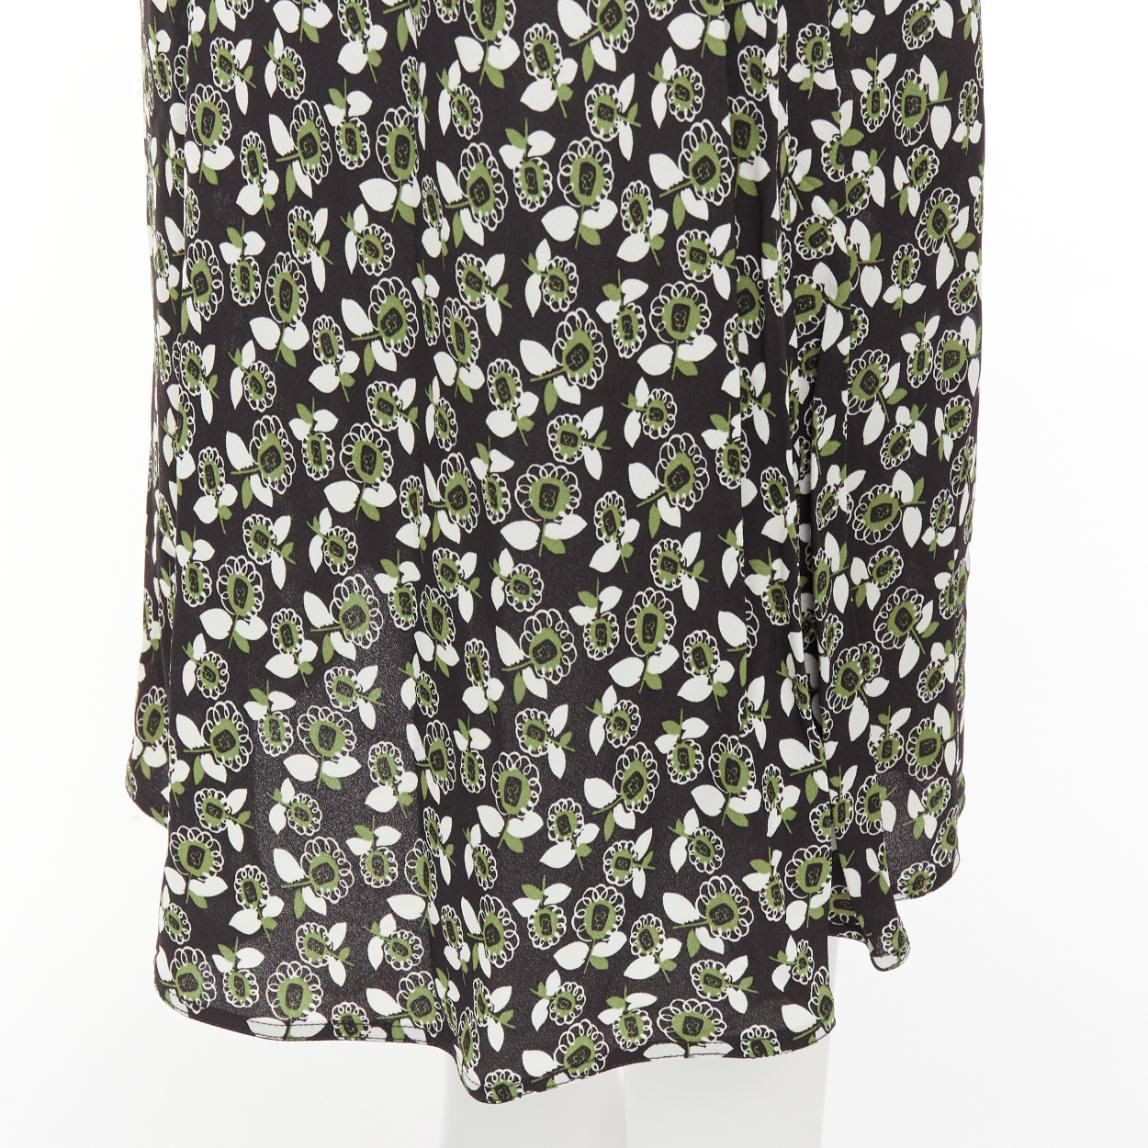 MARNI green black floral print viscose mid waist midi skirt IT40 S
Reference: CELG/A00433
Brand: Marni
Material: Viscose
Color: Green, Black
Pattern: Floral
Closure: Zip
Made in: Italy

CONDITION:
Condition: Excellent, this item was pre-owned and is